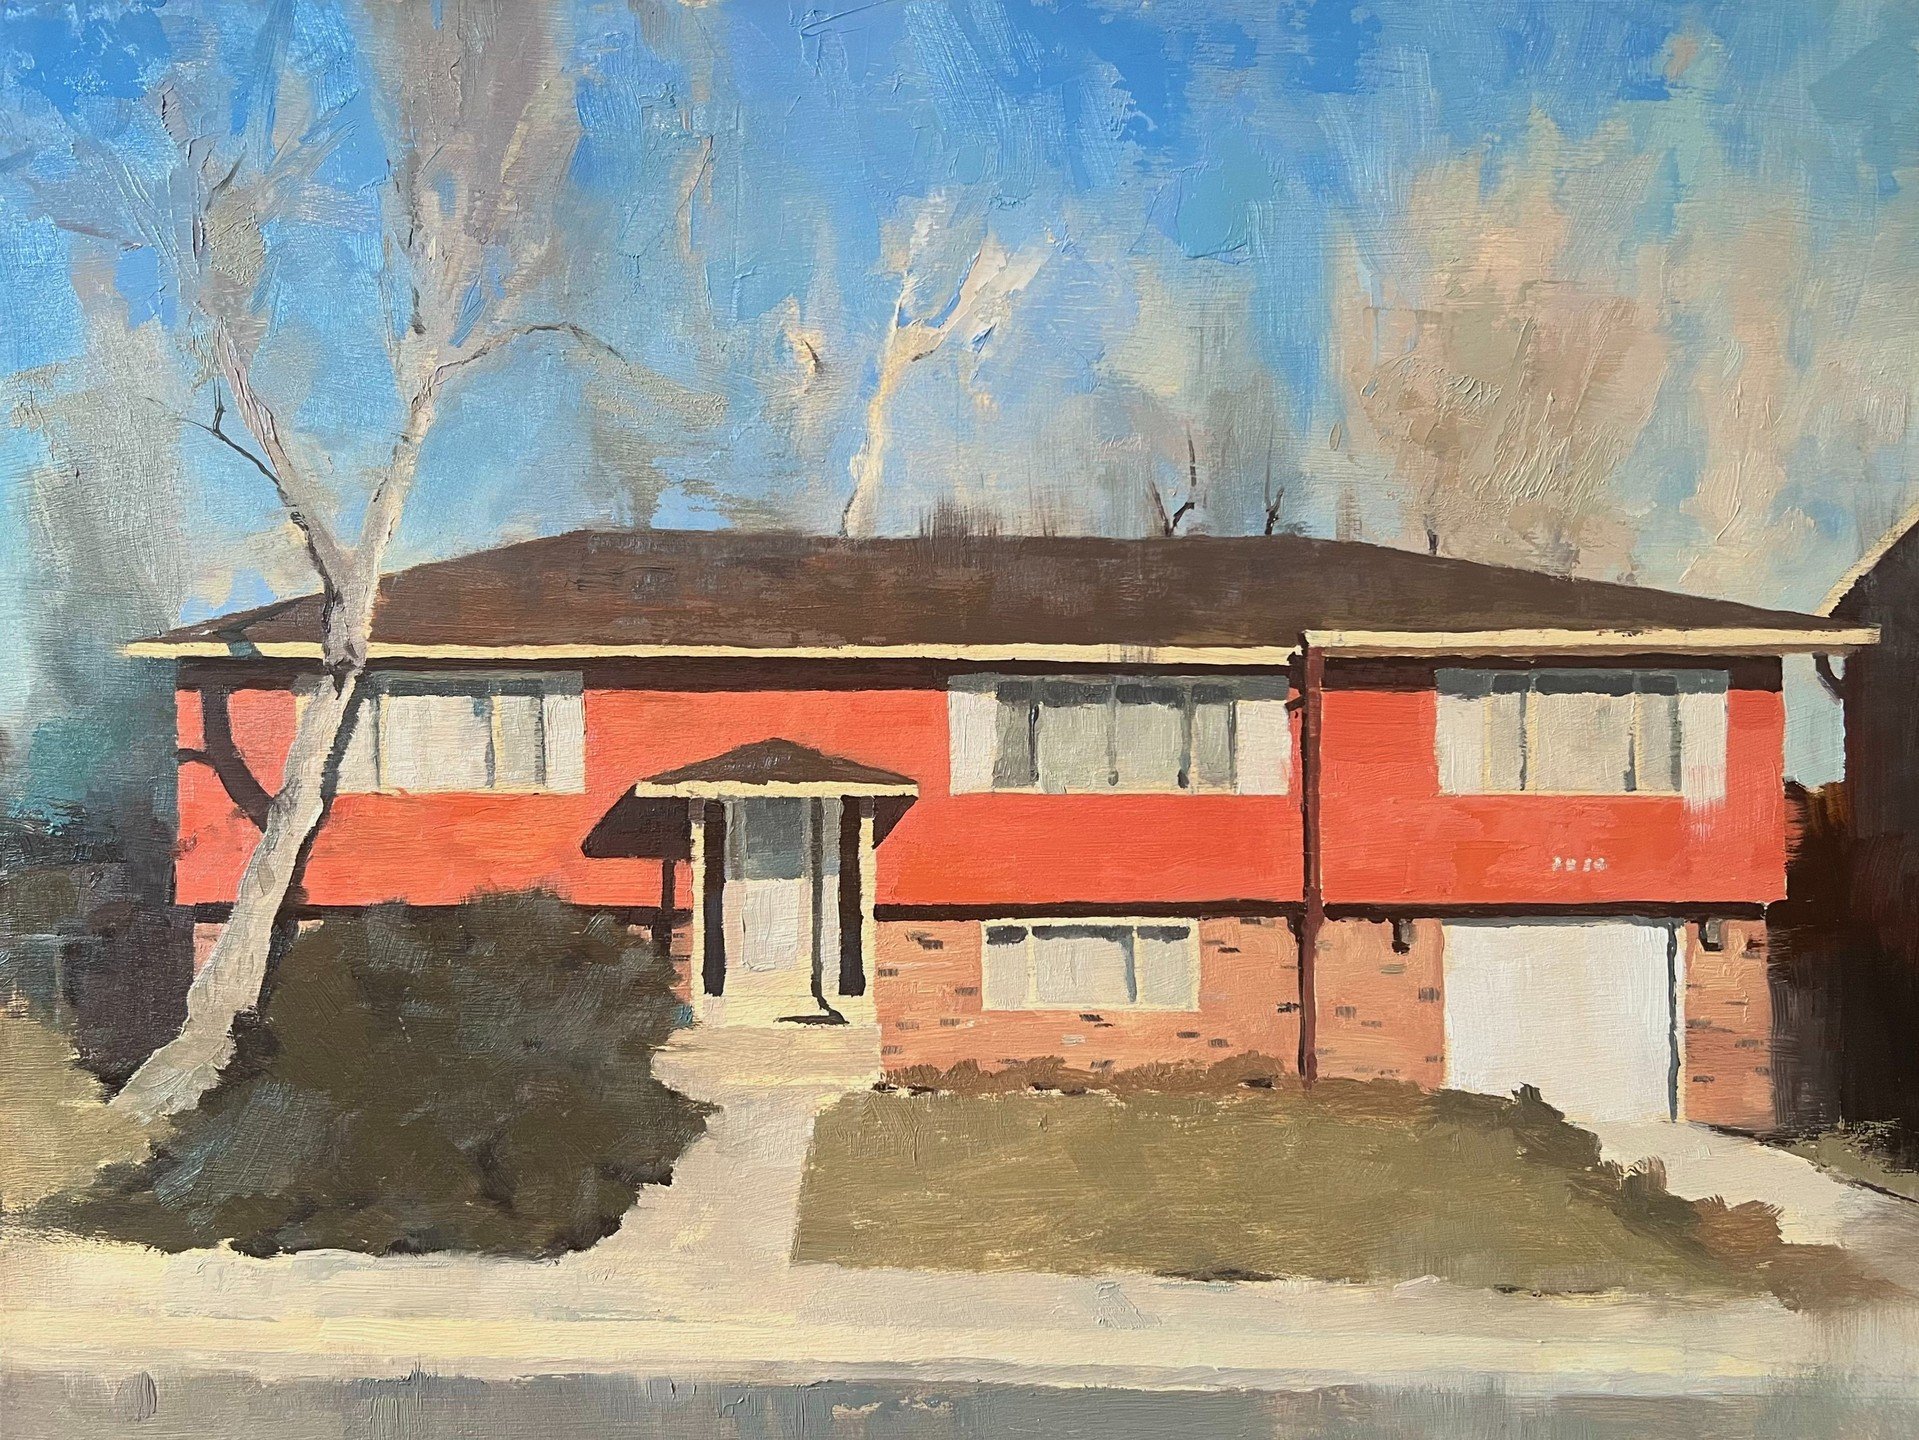 Another painting for the SOBO (South Boulder) series. Was it intentionally a style or just a solution to the times?

#oilpainting #SOBO #landscapepainting #architecturalillustration #midcenturymodern #boulder #bouldercolorado #boulderartist #tablemes